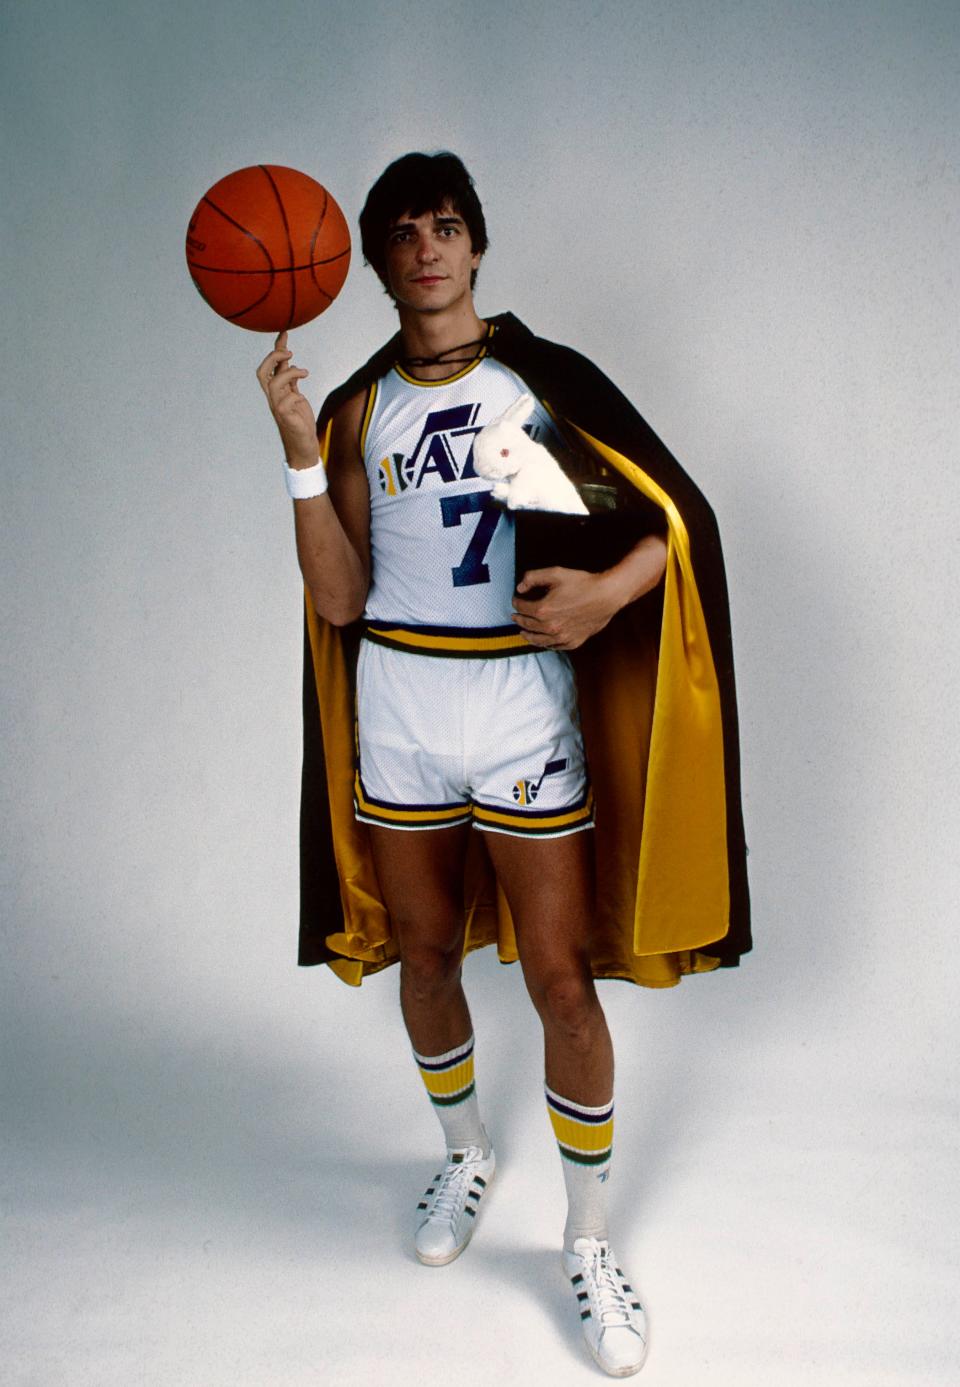 Utah Jazz guard Pete Maravich poses during a portrait session in New Orleans.